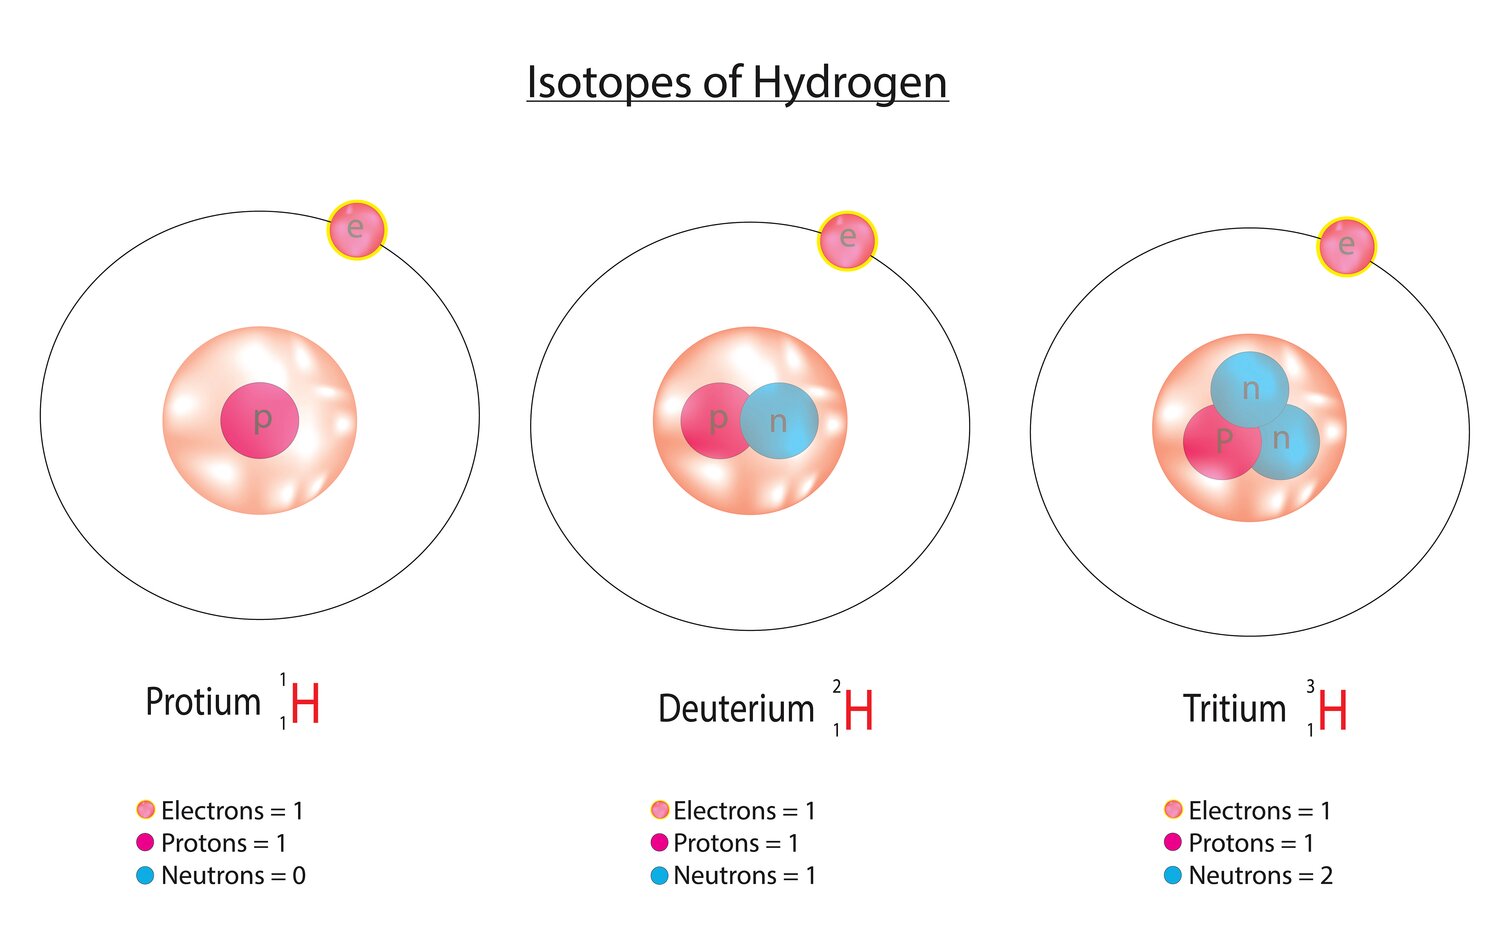 Deuterium is a stable isotope of hydrogen. It is used in military, industrial, and scientific applications and requires a license to be exported to China.